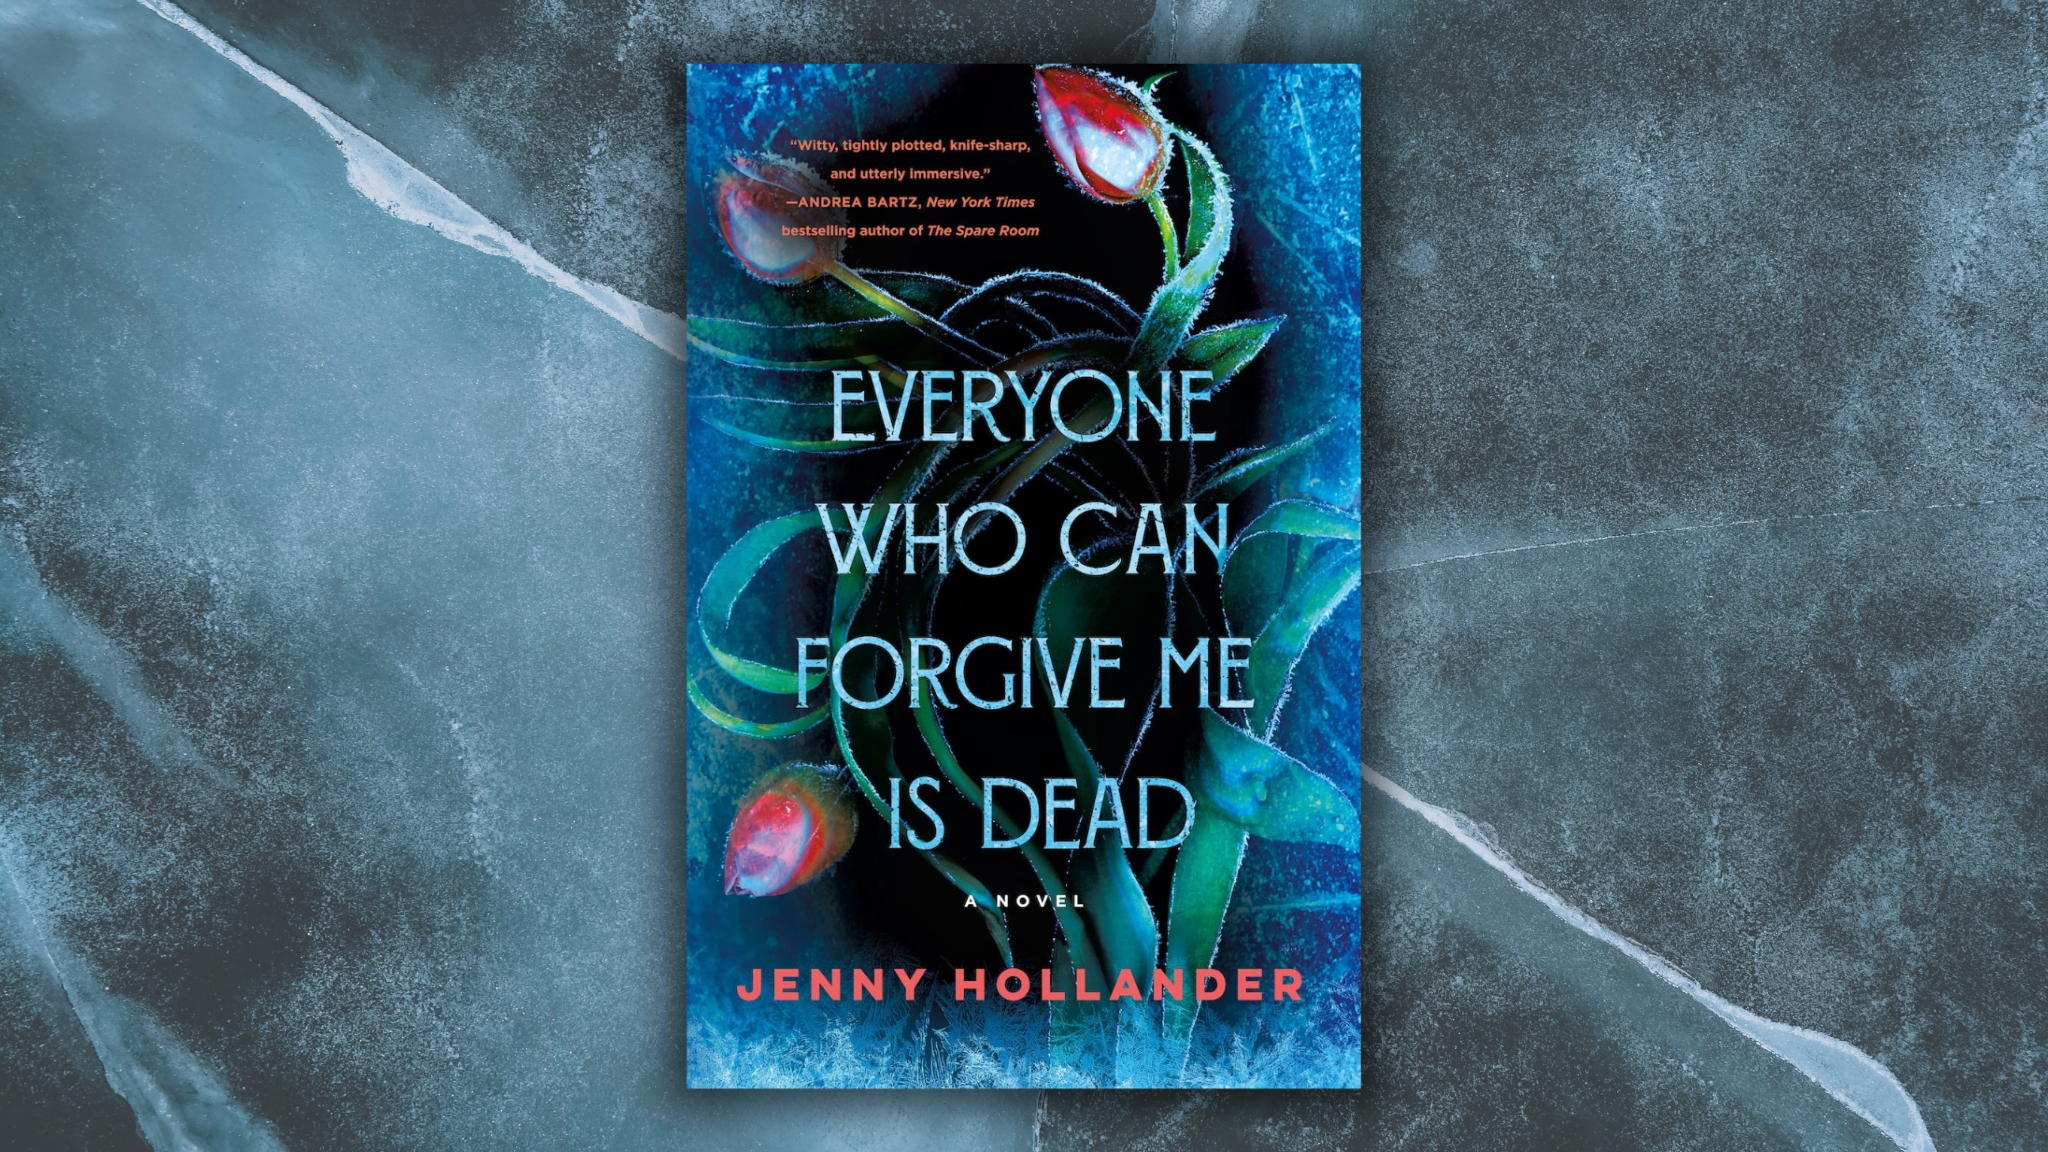 Everyone who can Forgive me is Dead by Jenny Hollander